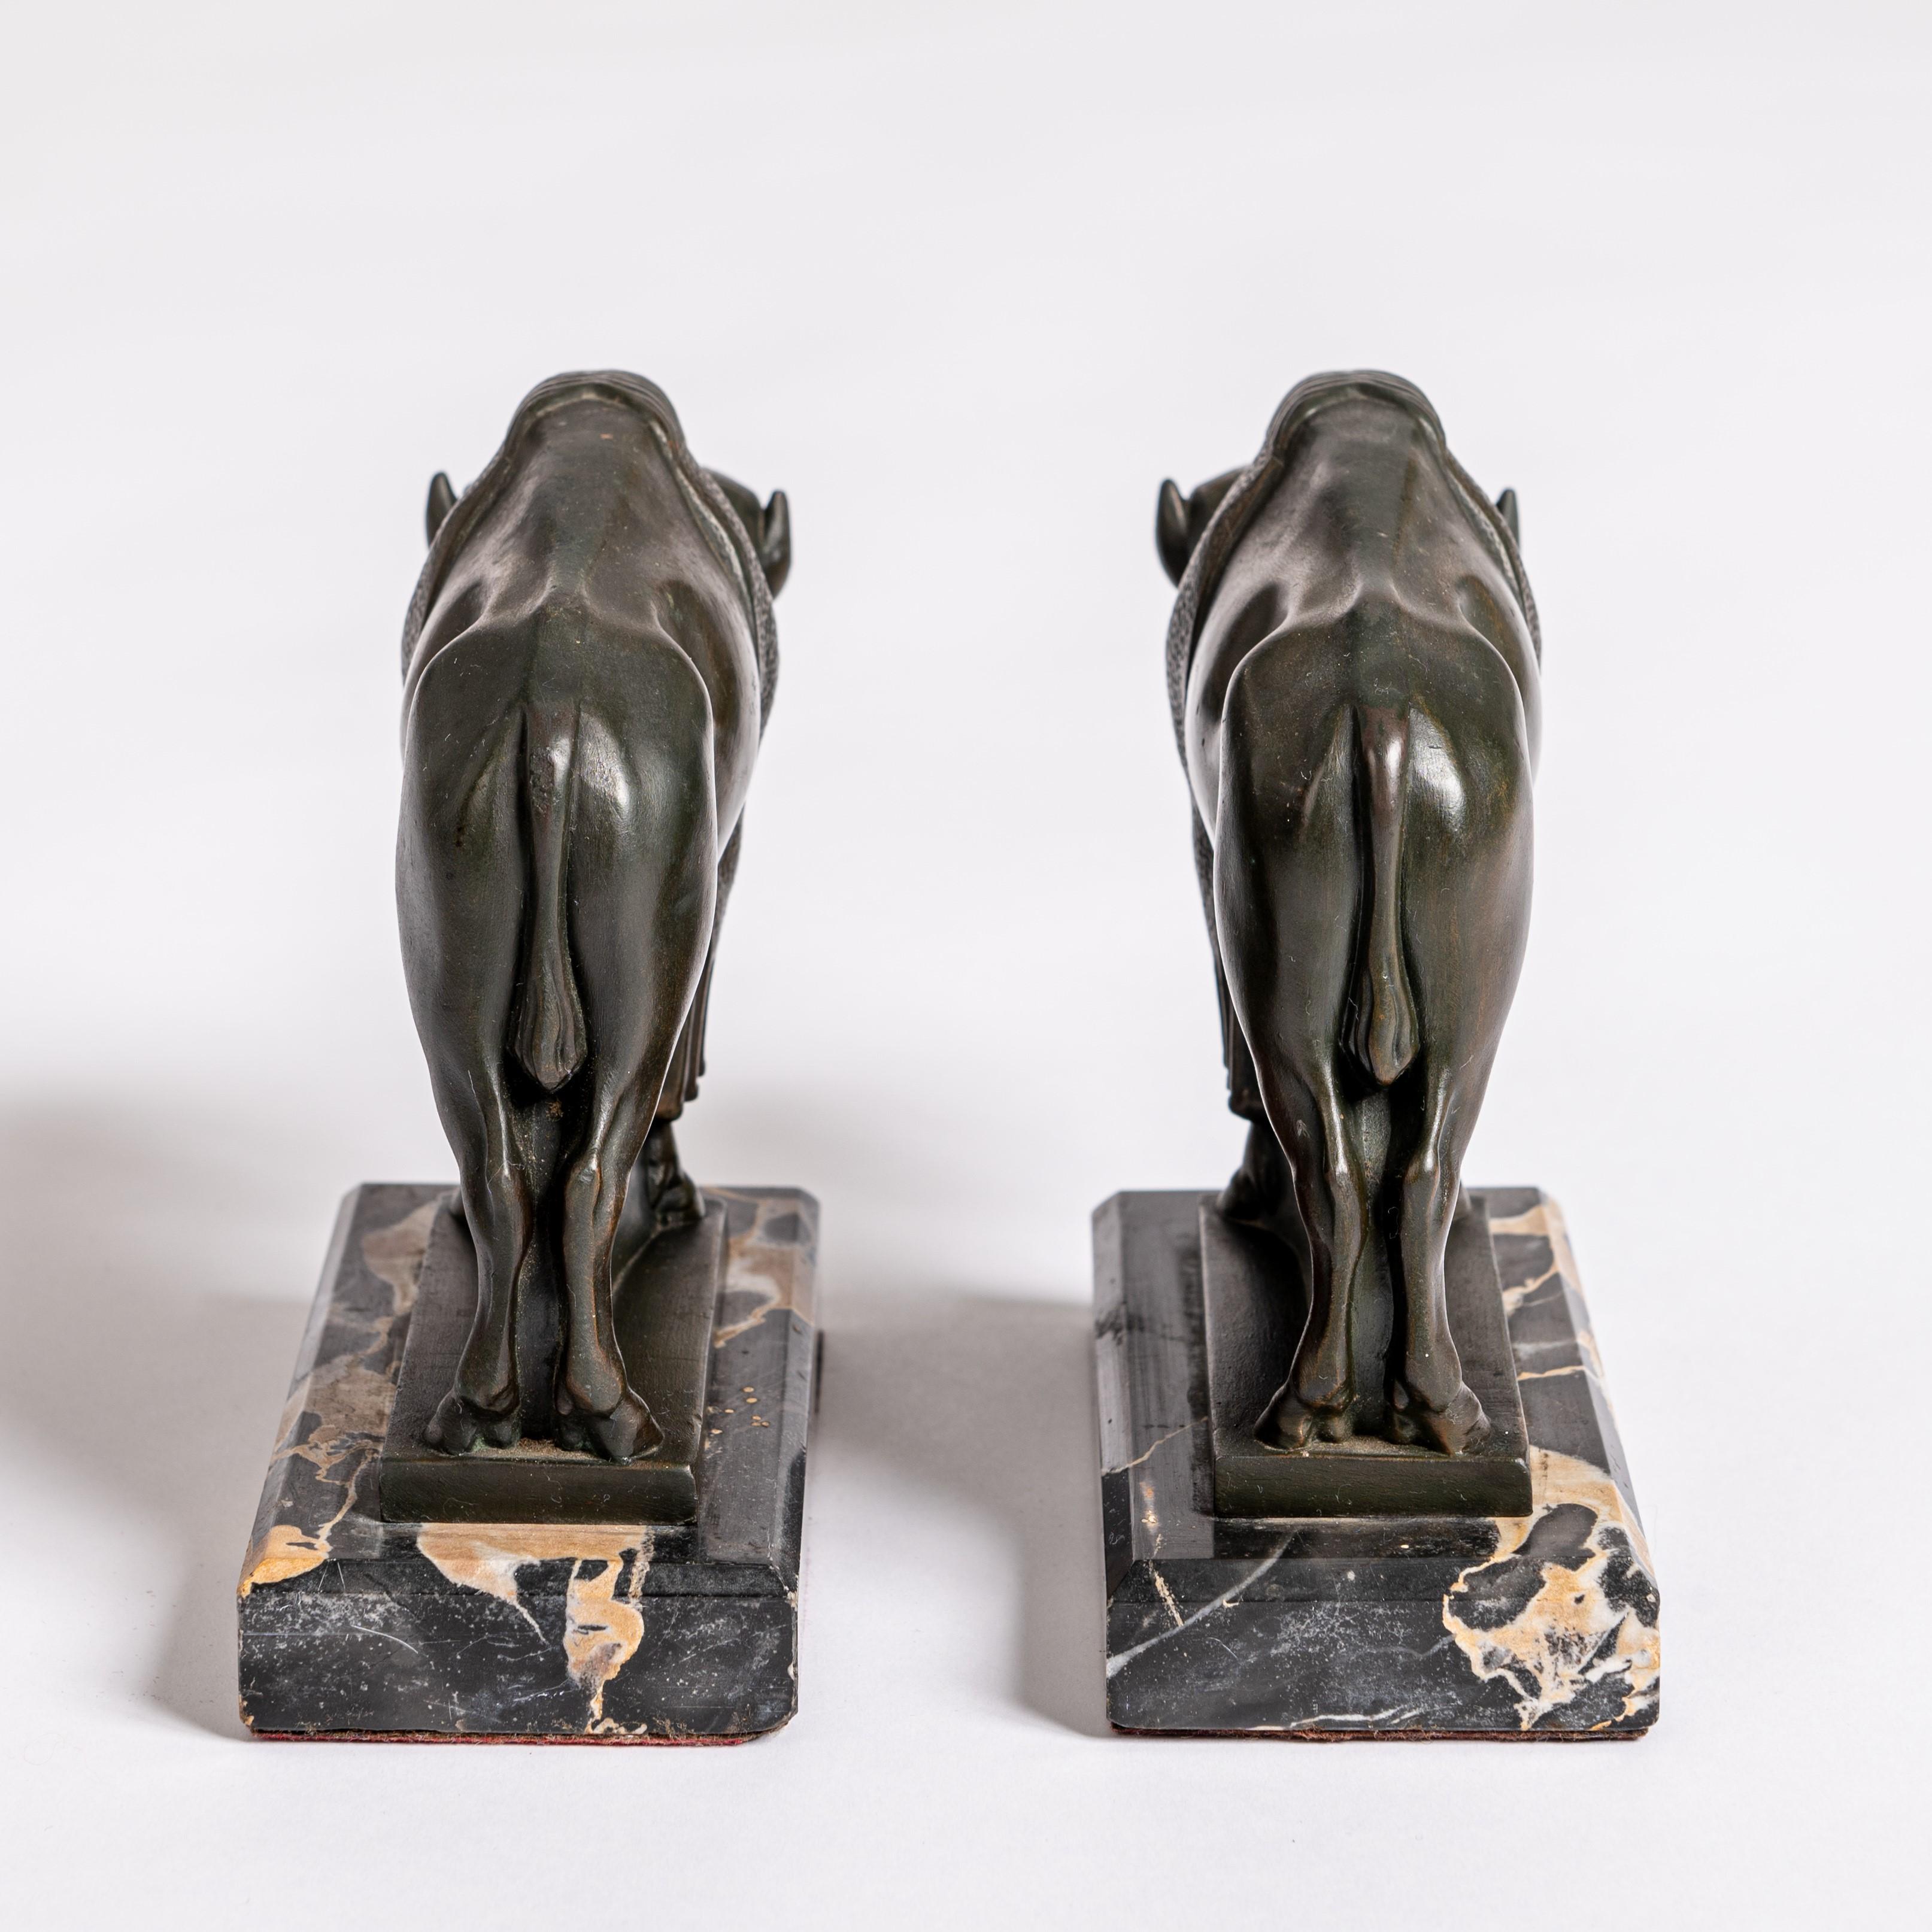 Cast Pair of French Art Deco Bookends Signed Max Le Verrier Green Bronze on Marble